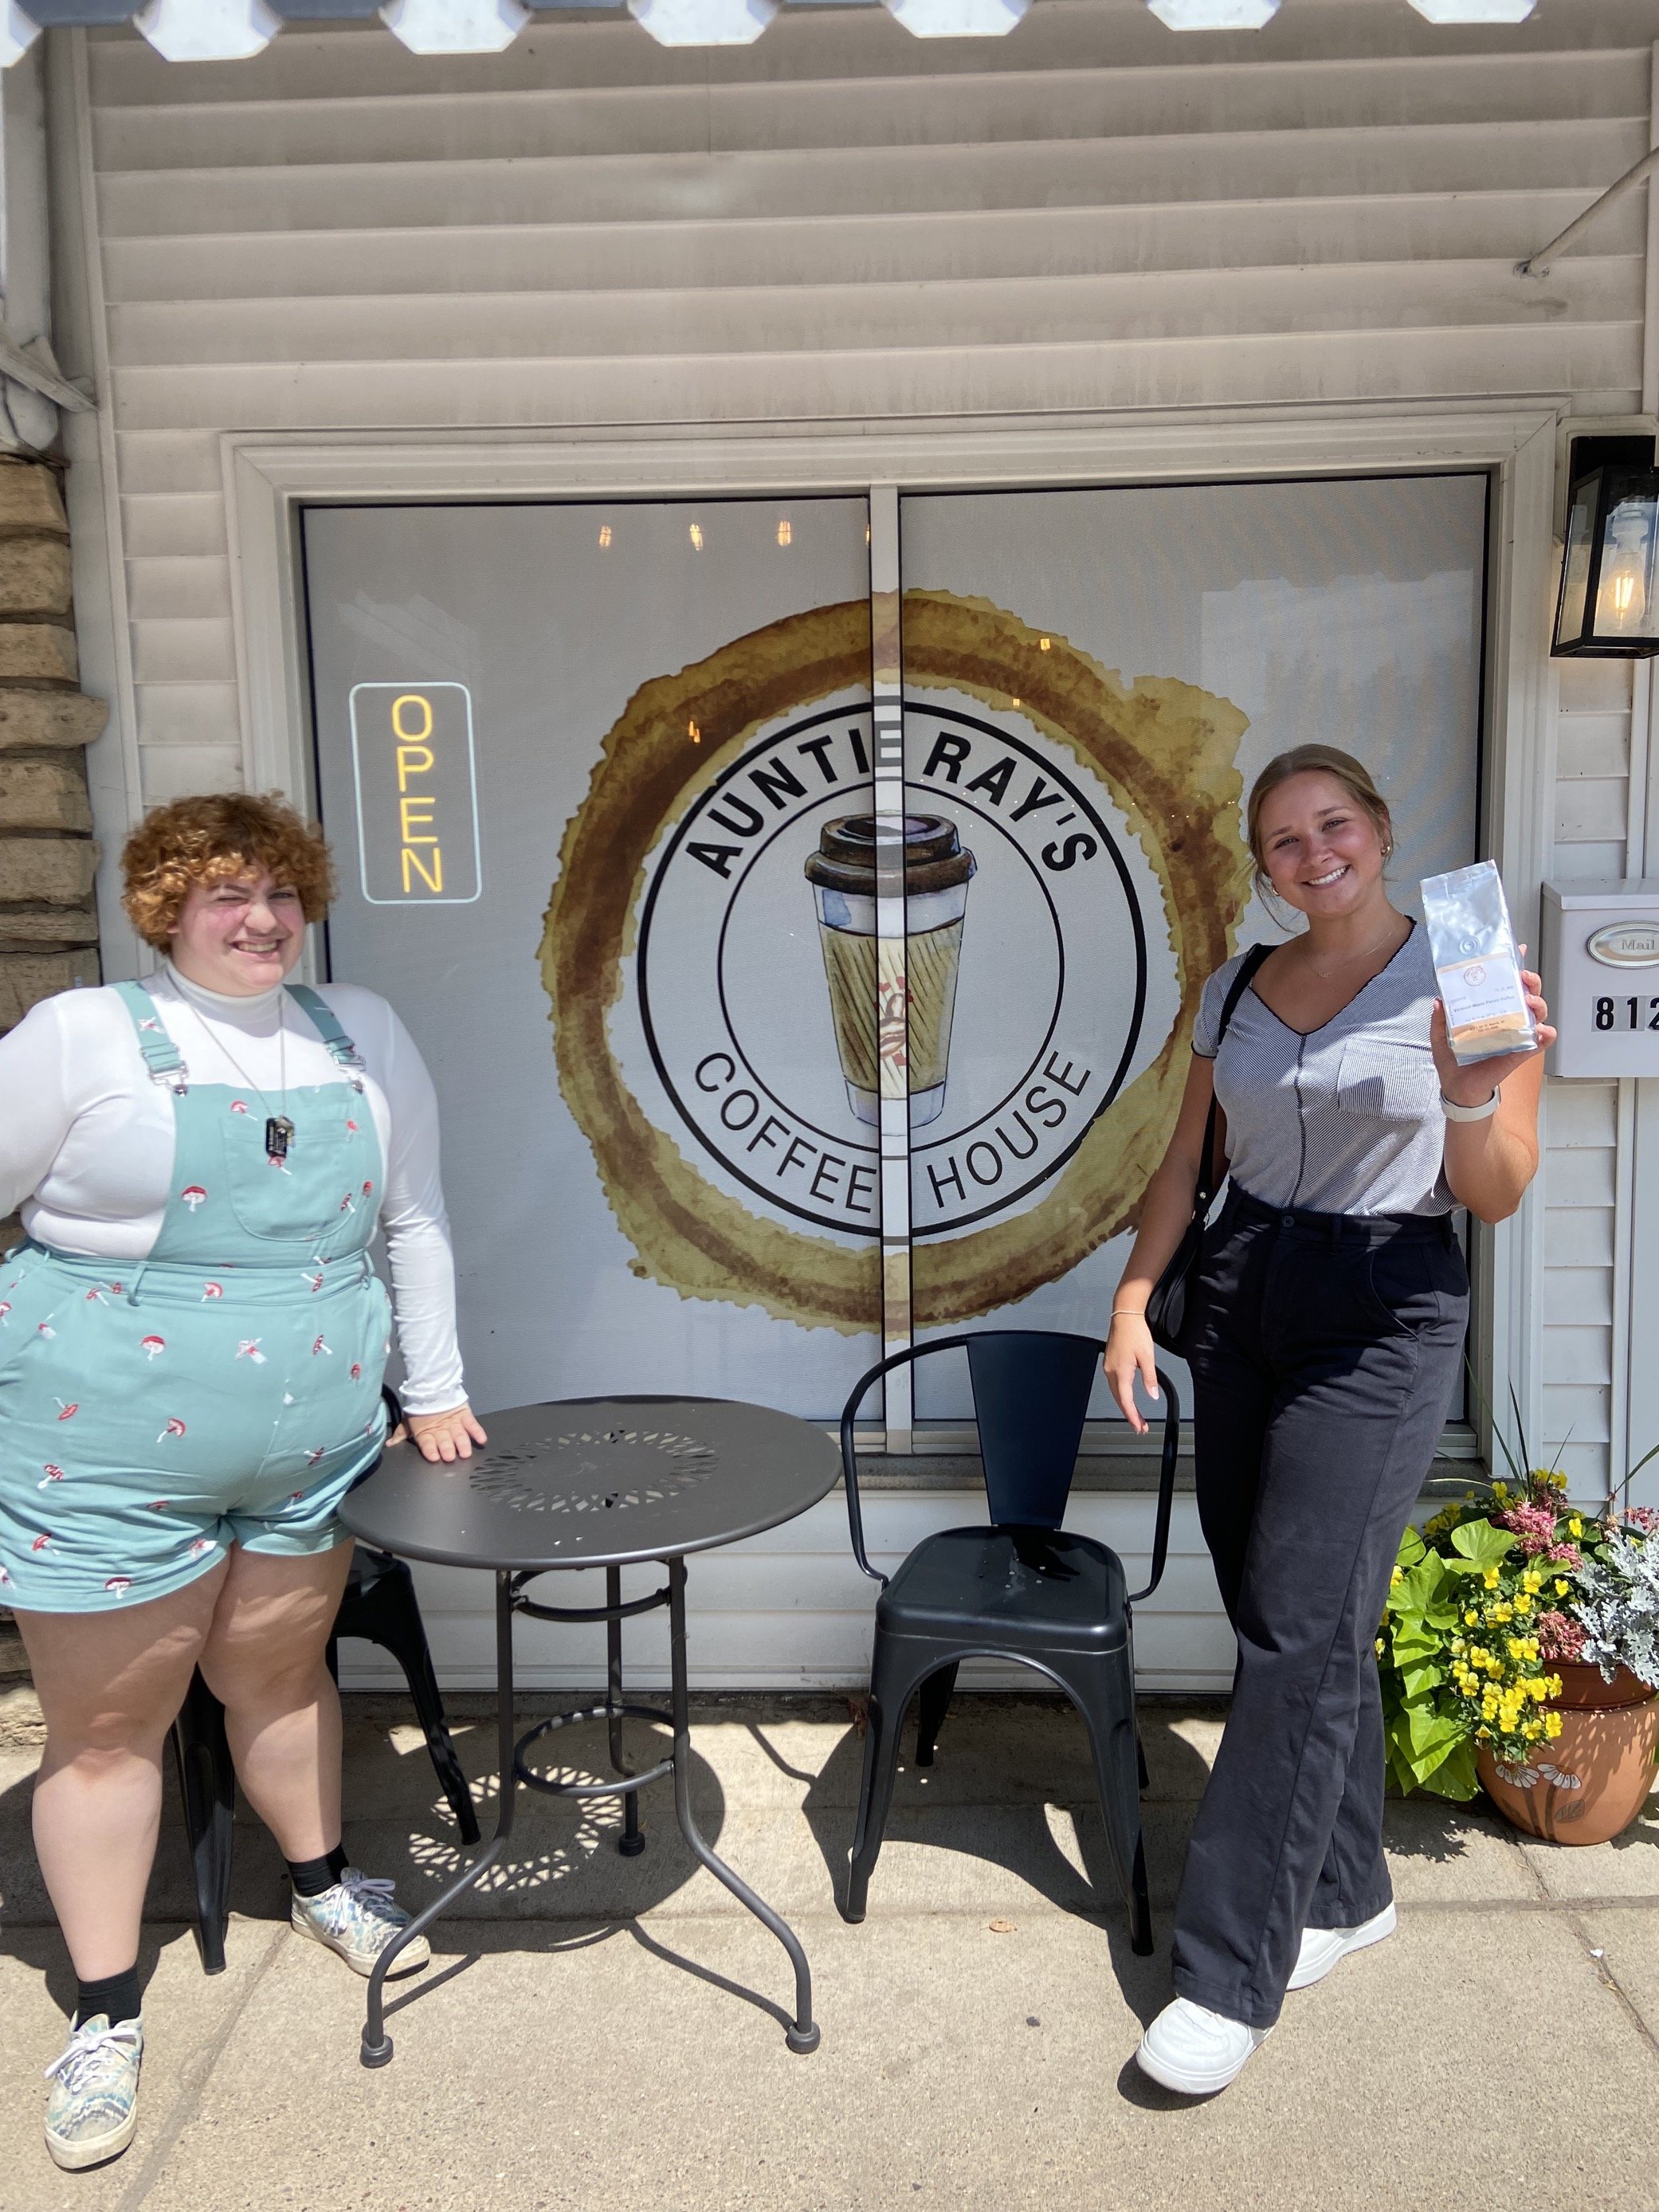 Visiting Local Shops in Merrill, WI